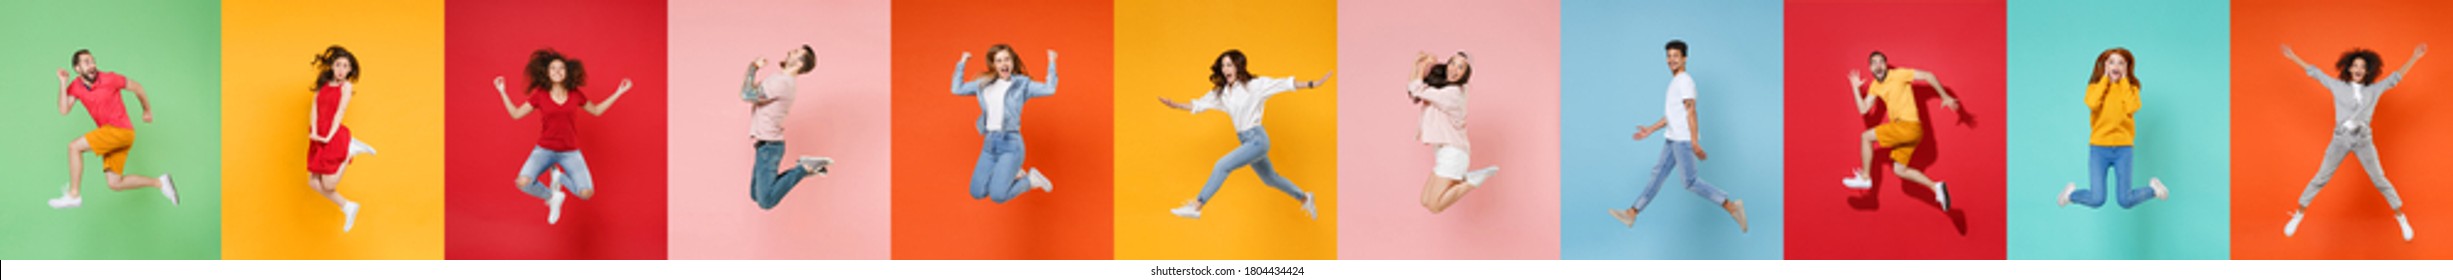 Photo set collage of eleven multiethnic expressive happy young people group wearing t-shirts having fun, jumping or flying up in air different poses isolated on colorful background, studio portraits